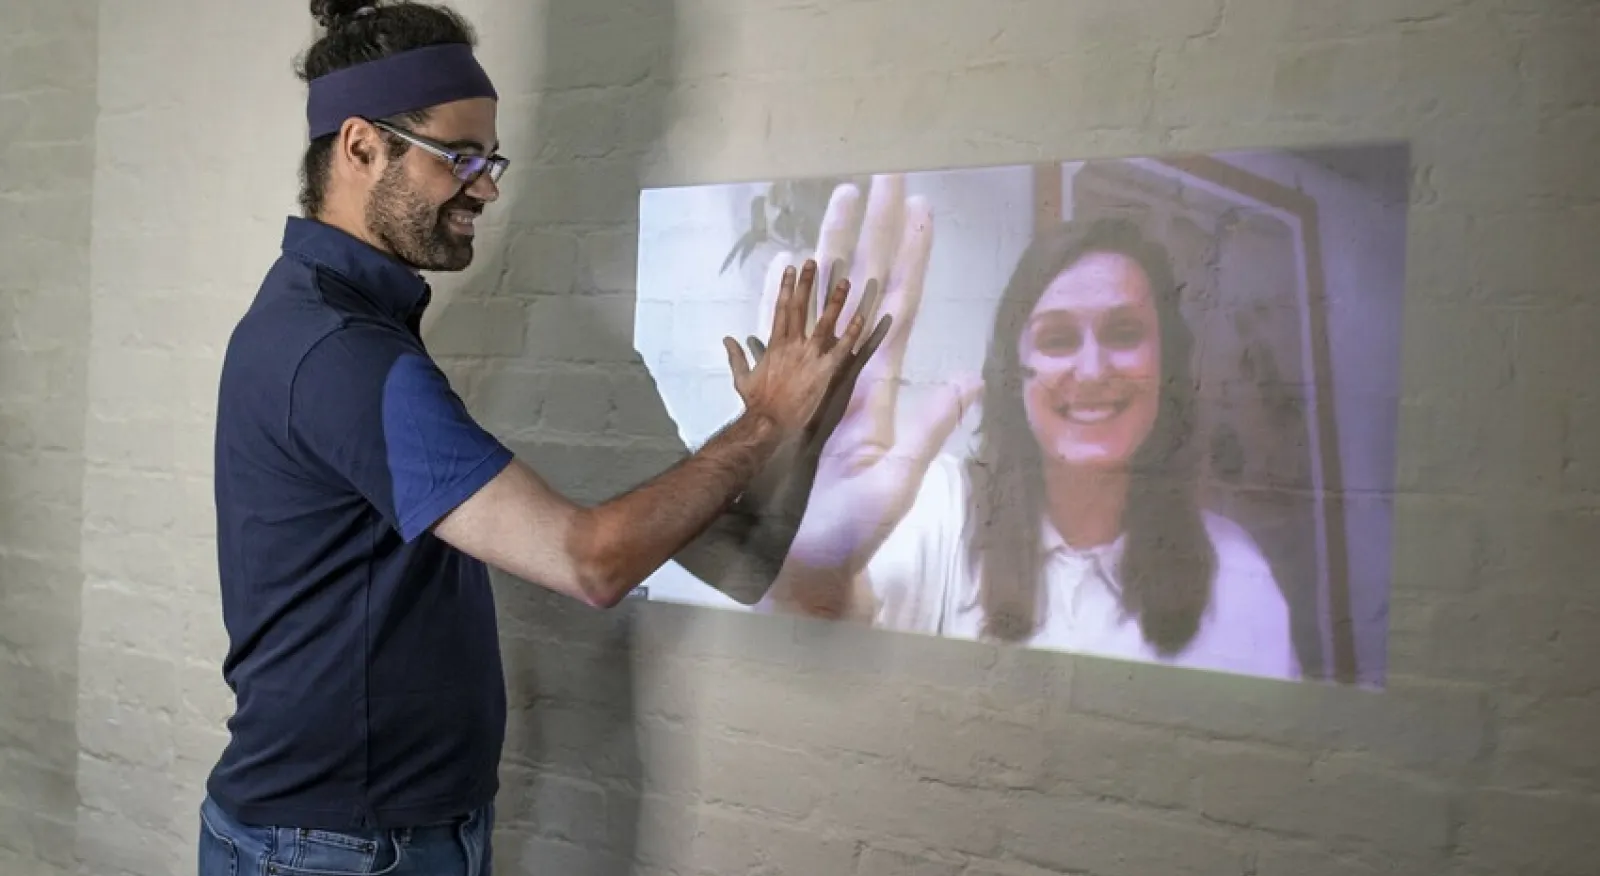 a person looks at a projection on a wall and holds their hand up to match the hand of a person in the projection. Both smile